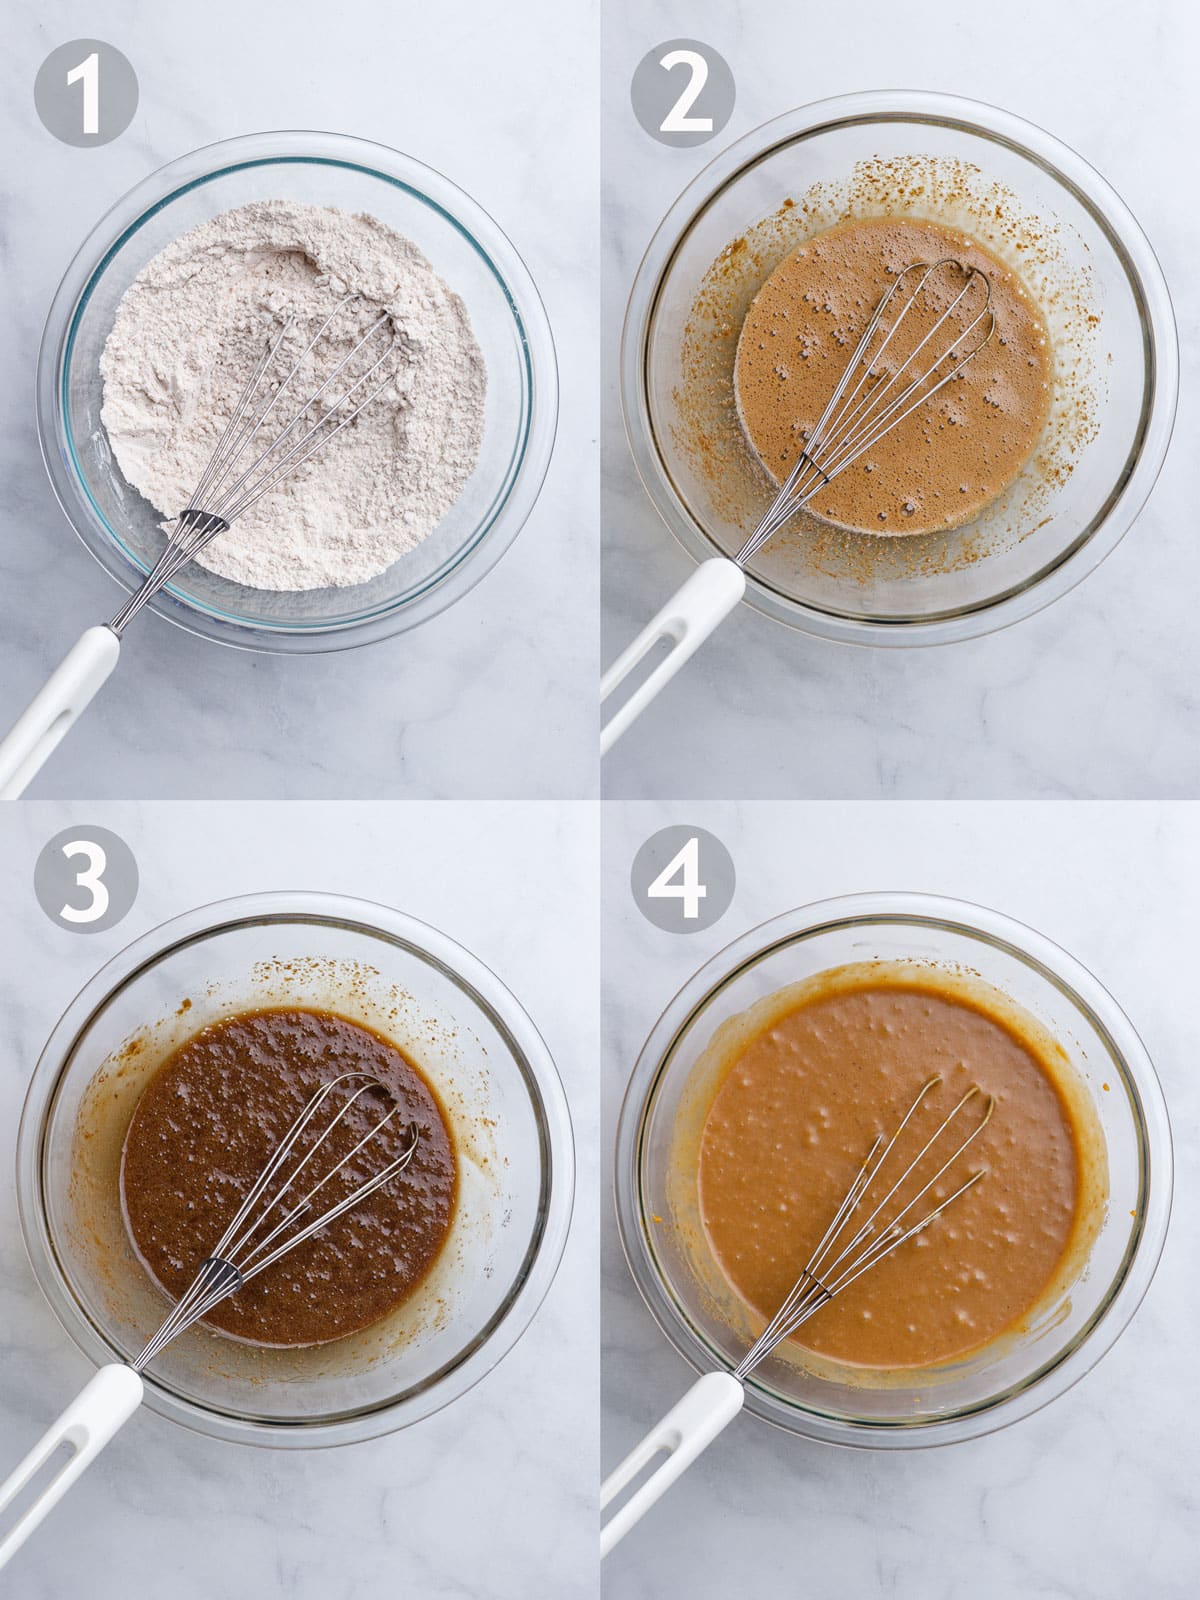 Steps to make muffins including mixing dry ingredients, mixing wet ingredients and combining the wet and dry ingredients.